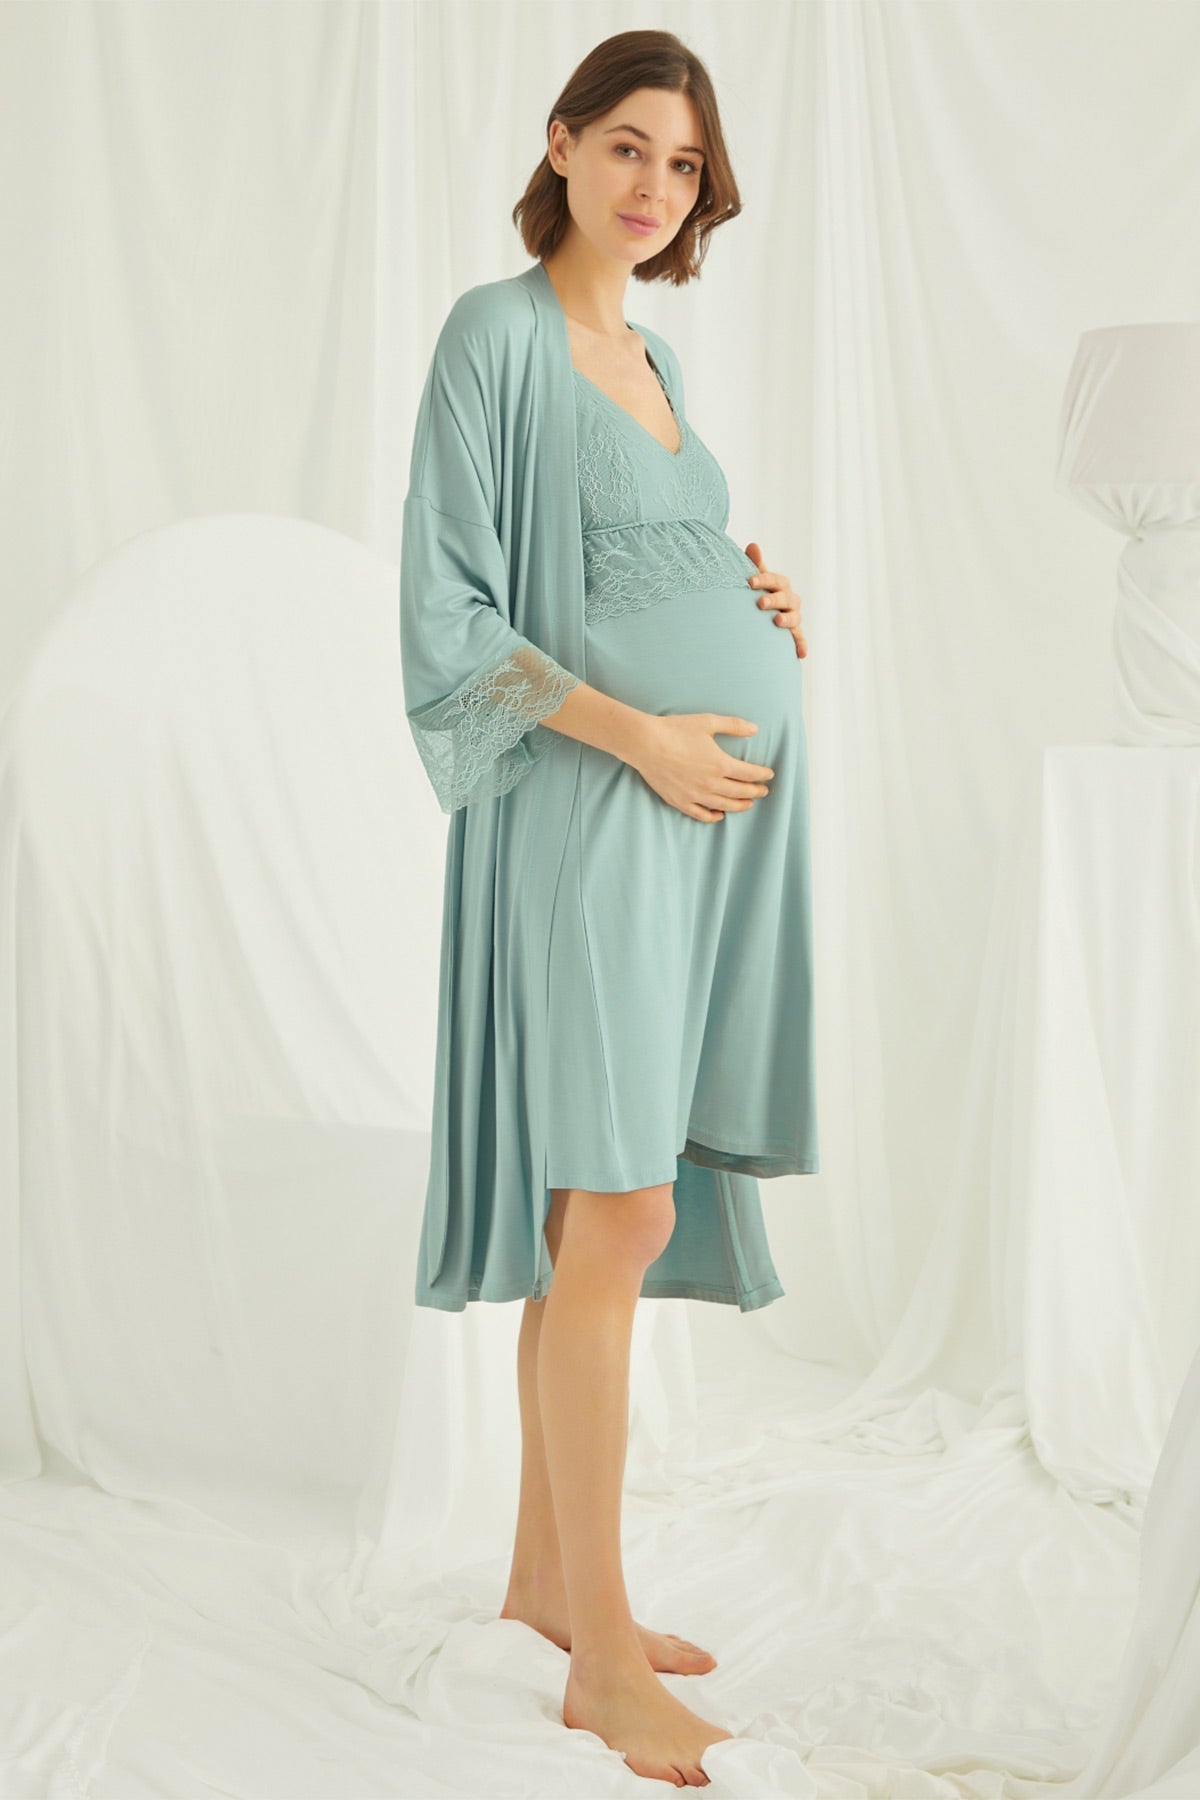 Pretty Comy Women's Maternity Gowns, Nursing Nightgown with